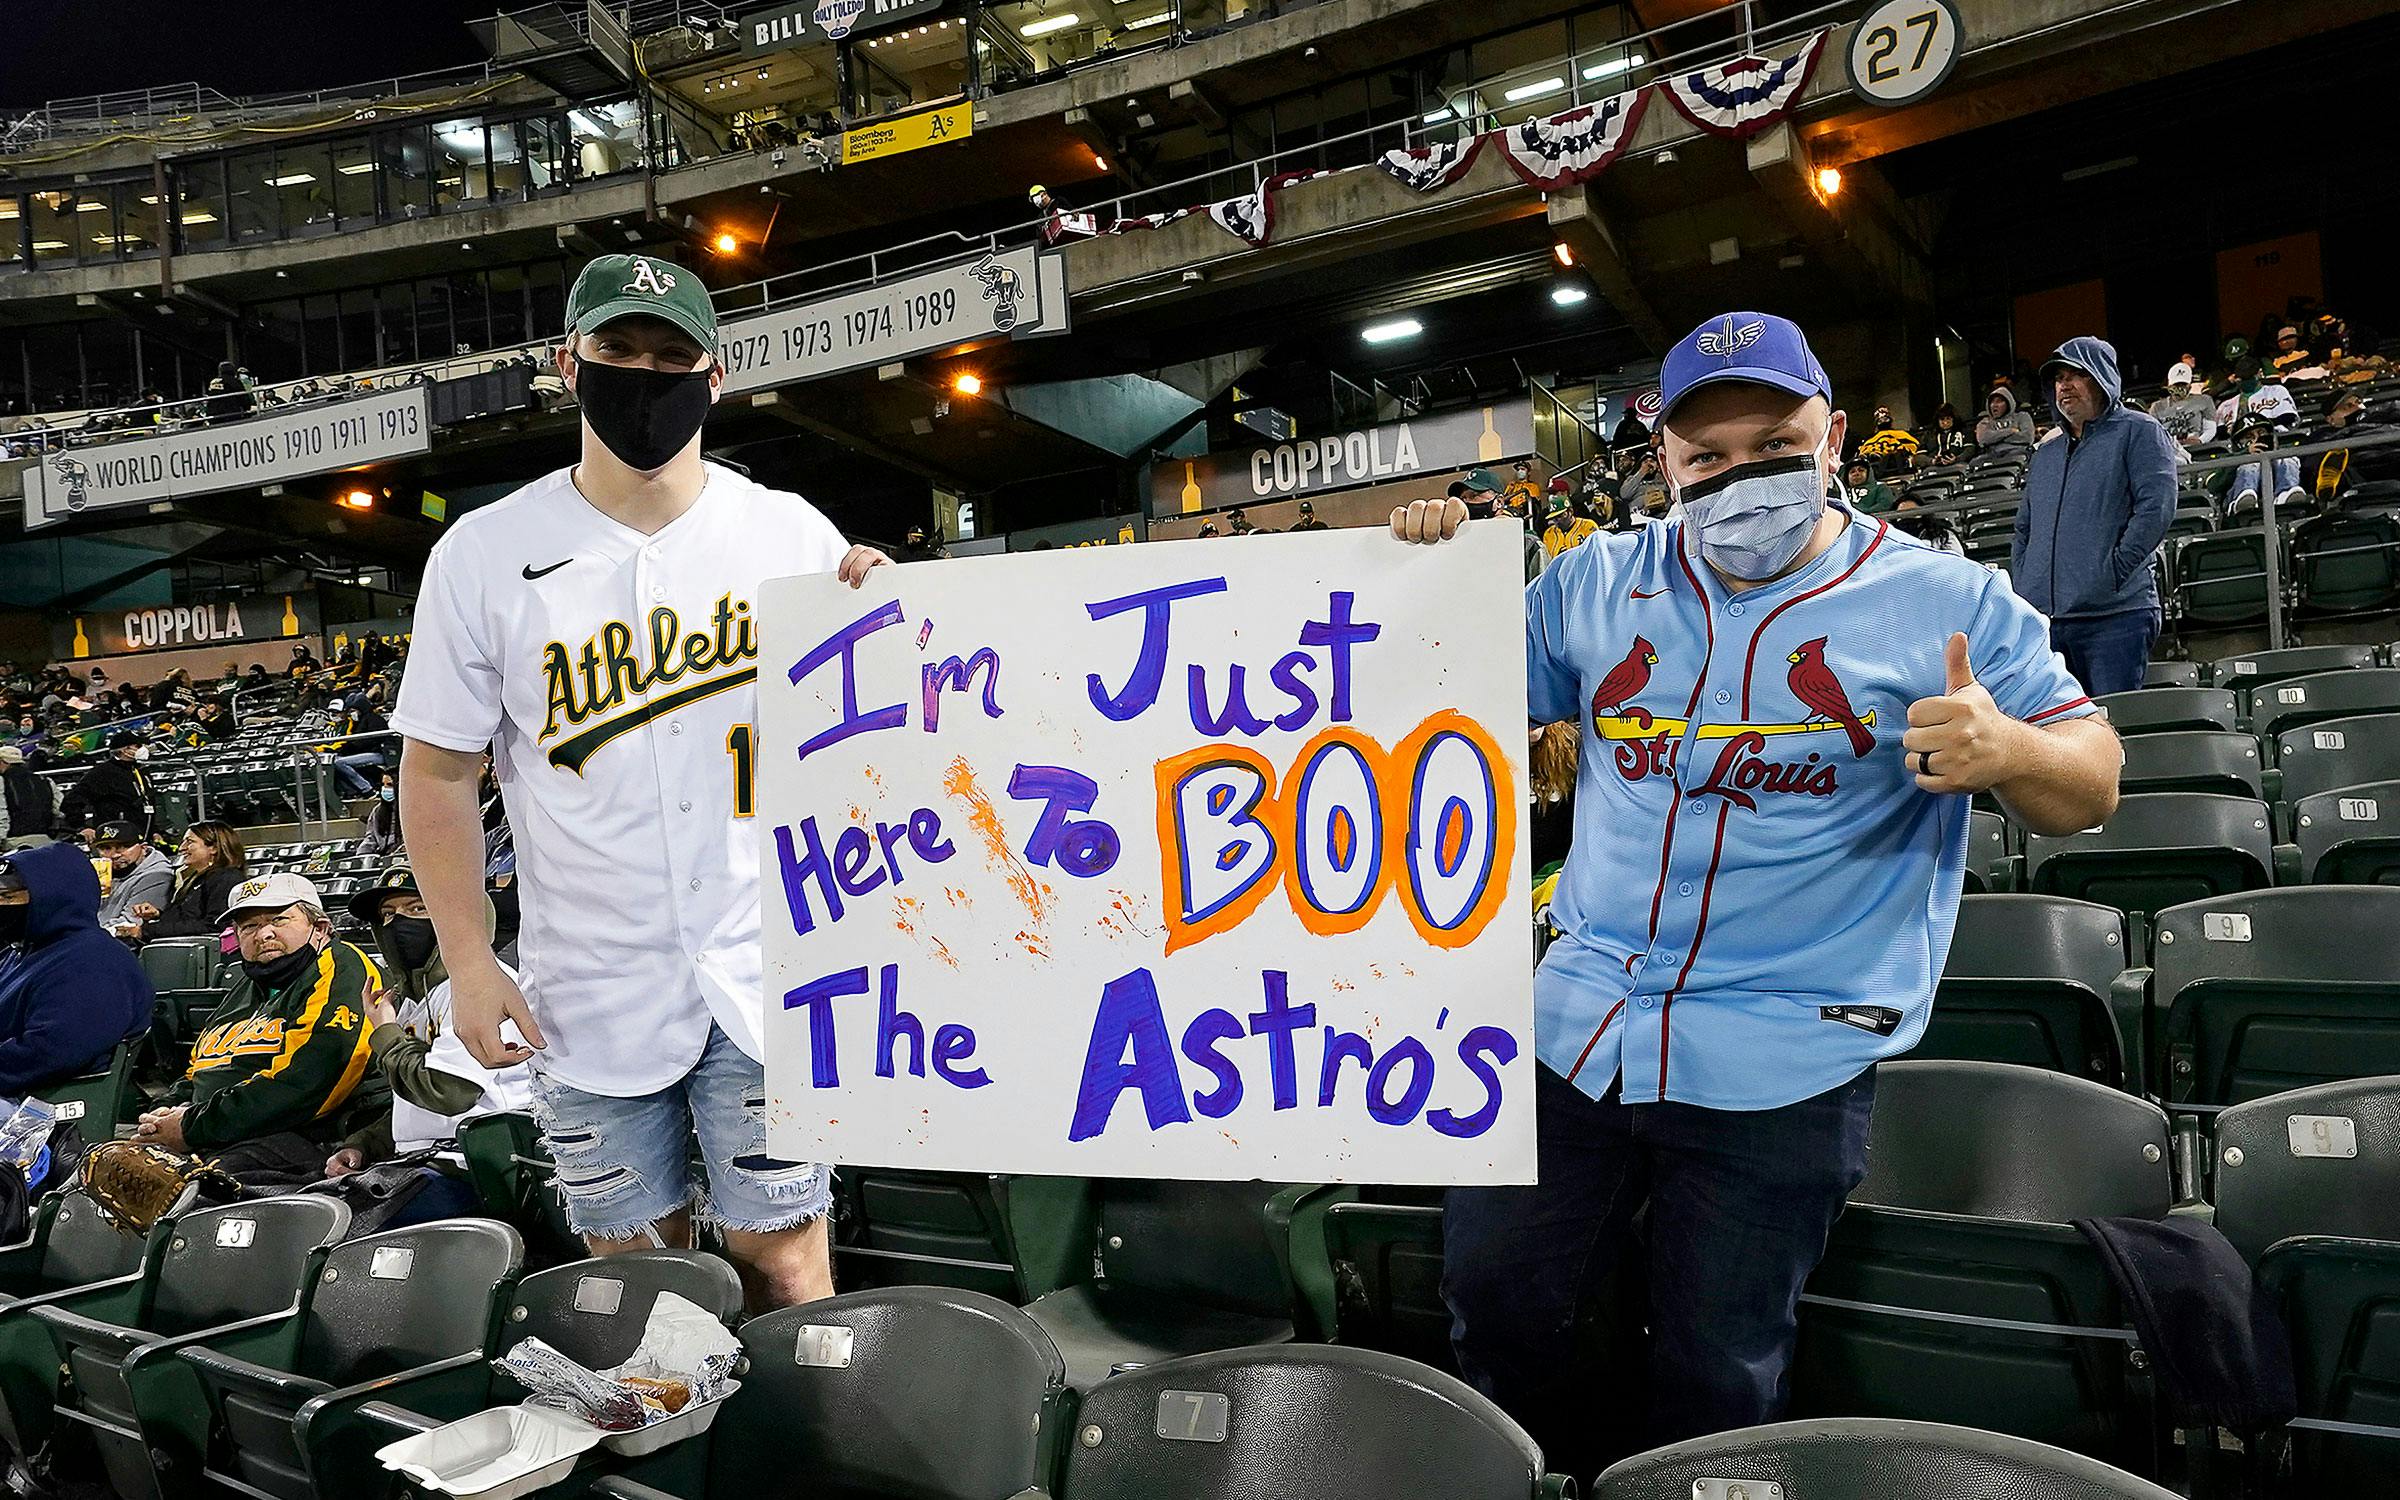 ASTROS NATION! Thank y'all so much for blowing up Wanksta. Y'all